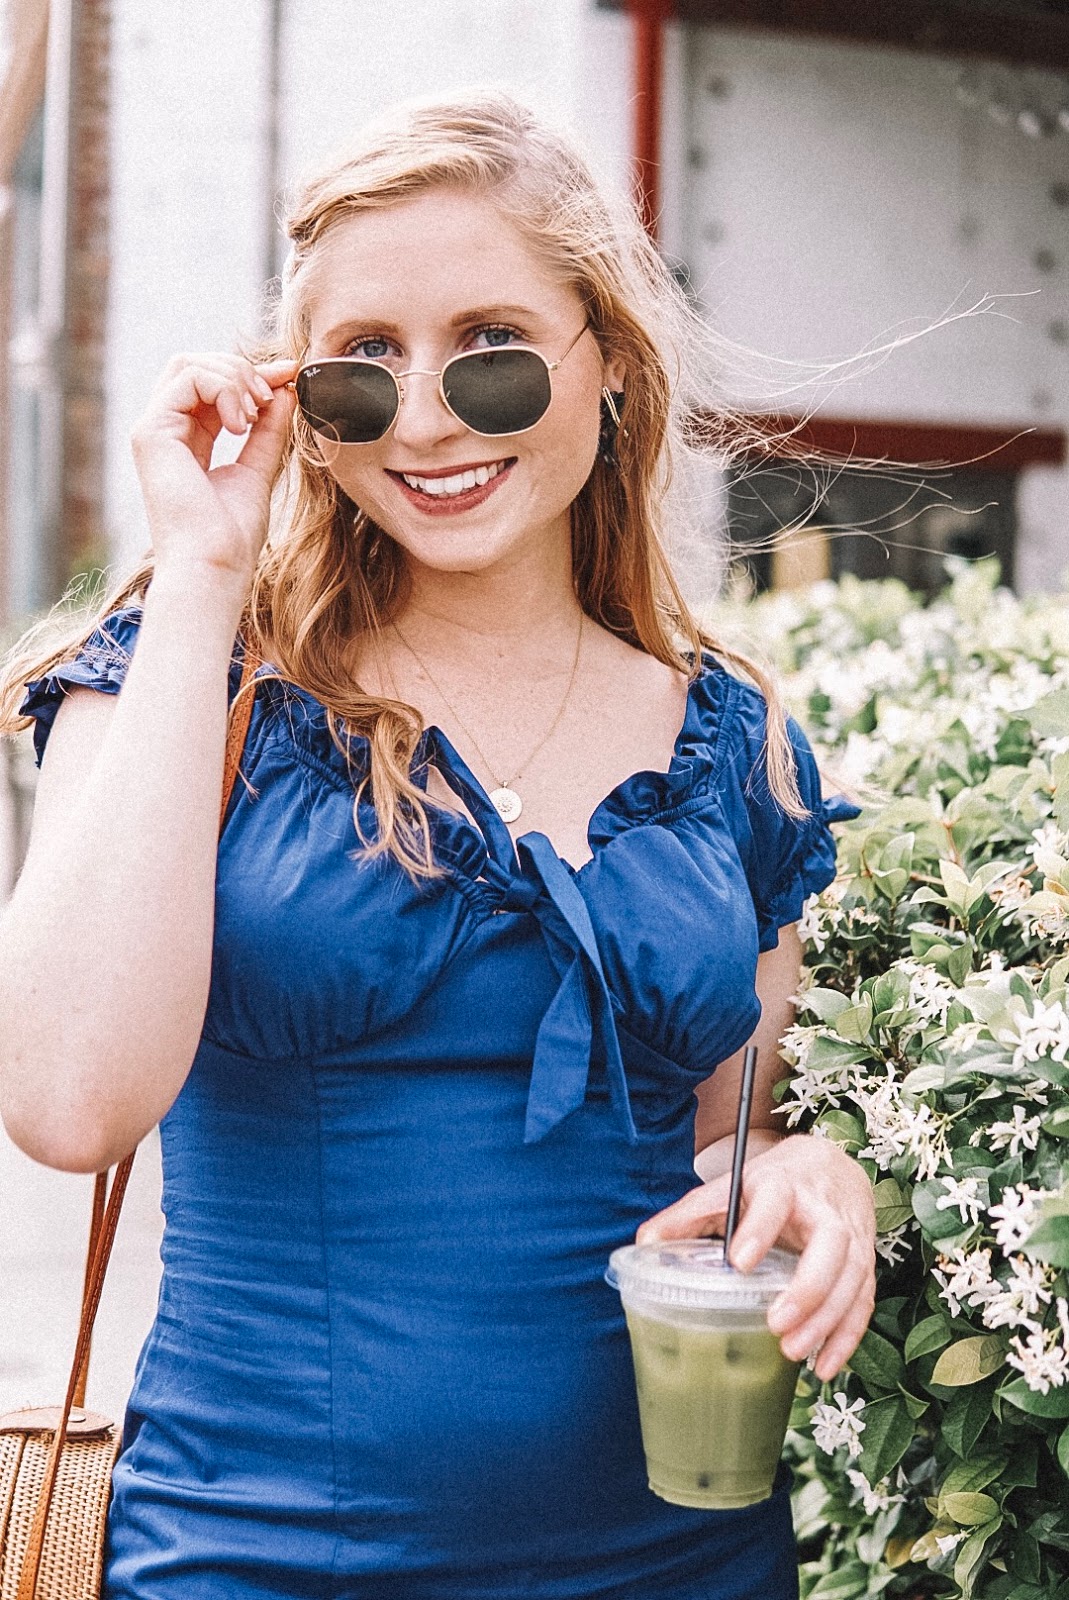 tampa blogger amanda burrows is wearing a navy ruffle dress from francesca's holding a matcha tea from Intermezzo Coffee. She is standing outside Green Bench Brewing. She is wearing Ray Ban Sunglasses and carrying a round rattan circle bag. She is smiling at the camera and standing next to jasmine flowers in St. Petersburg, Florida.